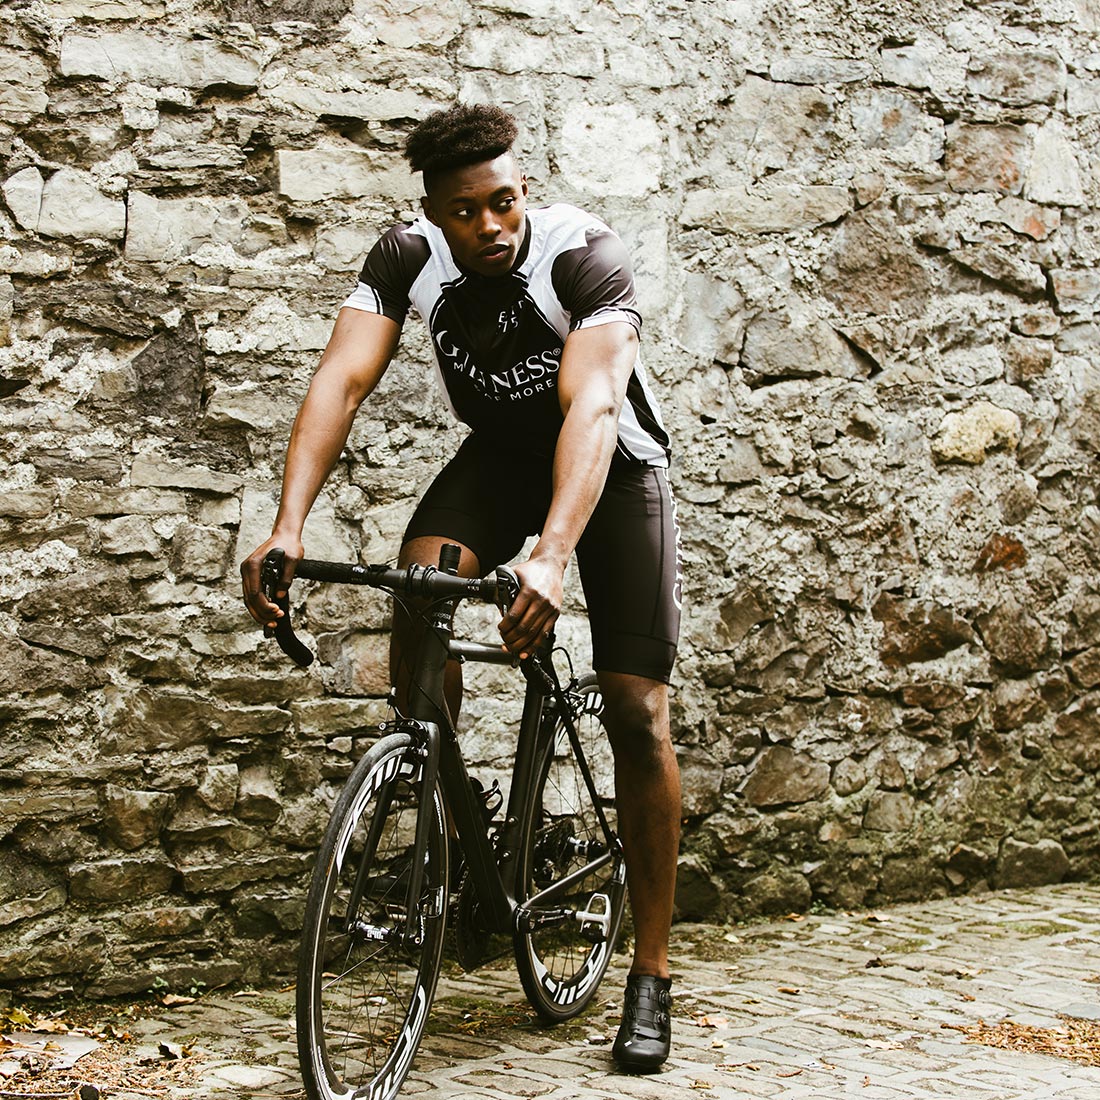 A man wearing a Guinness UK Cycling Jersey is riding a bike in front of a stone wall.